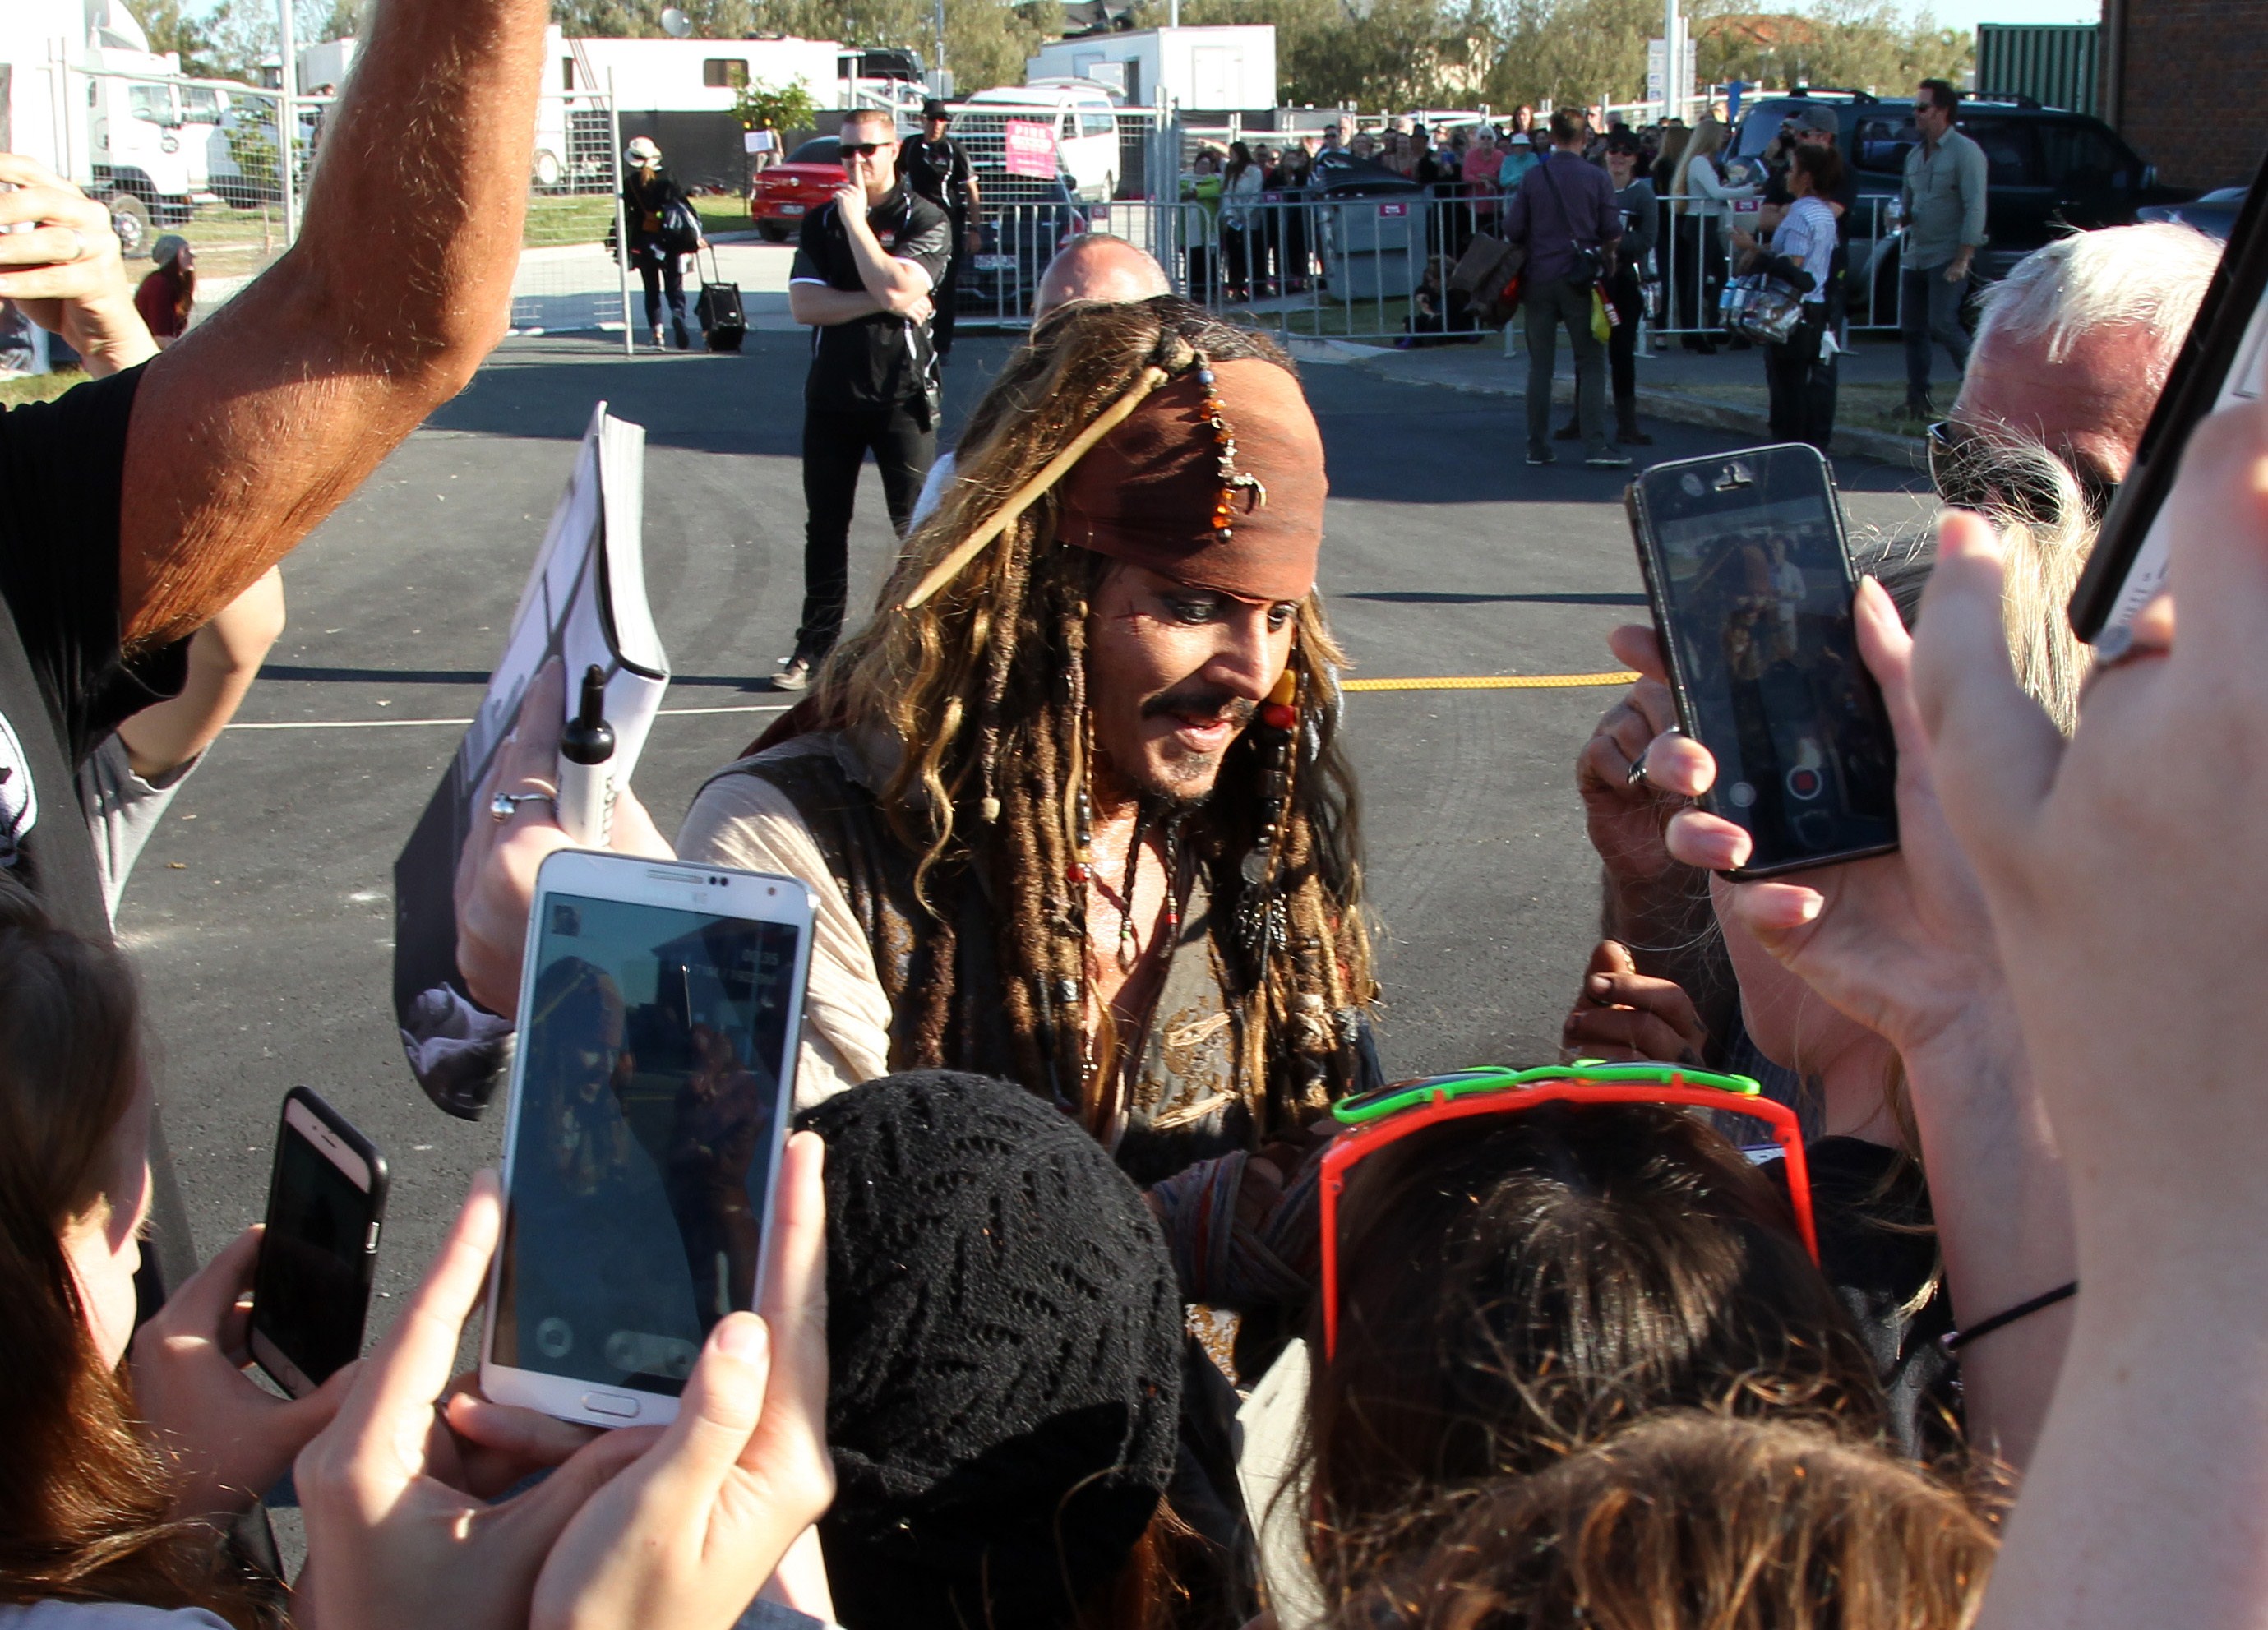 Johnny Depp dressed as Captain Jack Sparrow from "Pirates of the Caribbean" in Redland Bay, Brisbane on June 4, 2015. | Source: Getty Images